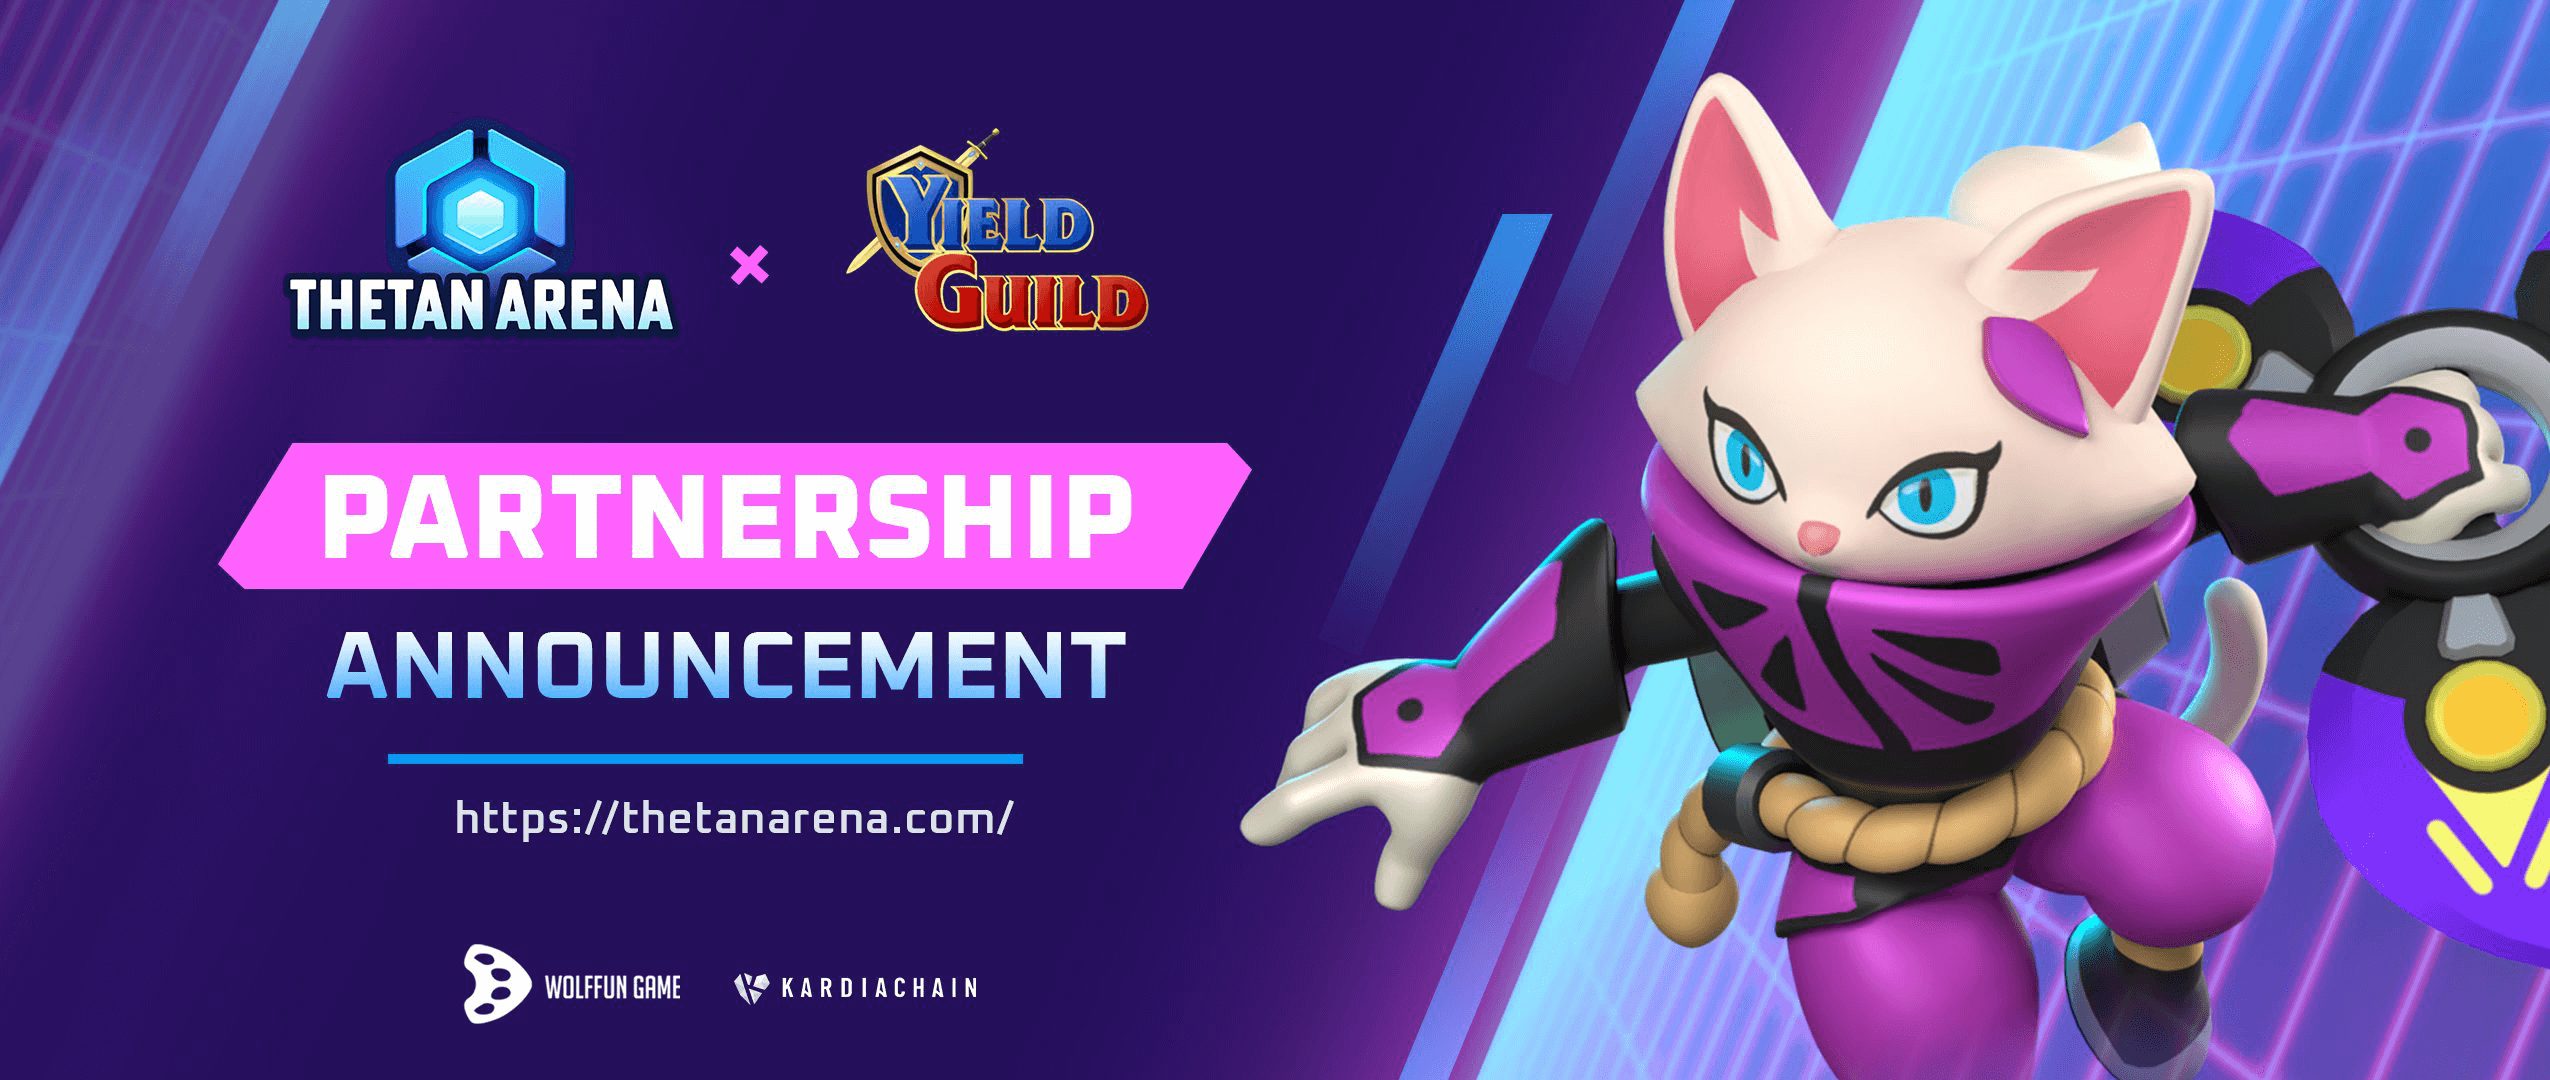 Thetan Arena x Yield Guild Games Collaboration